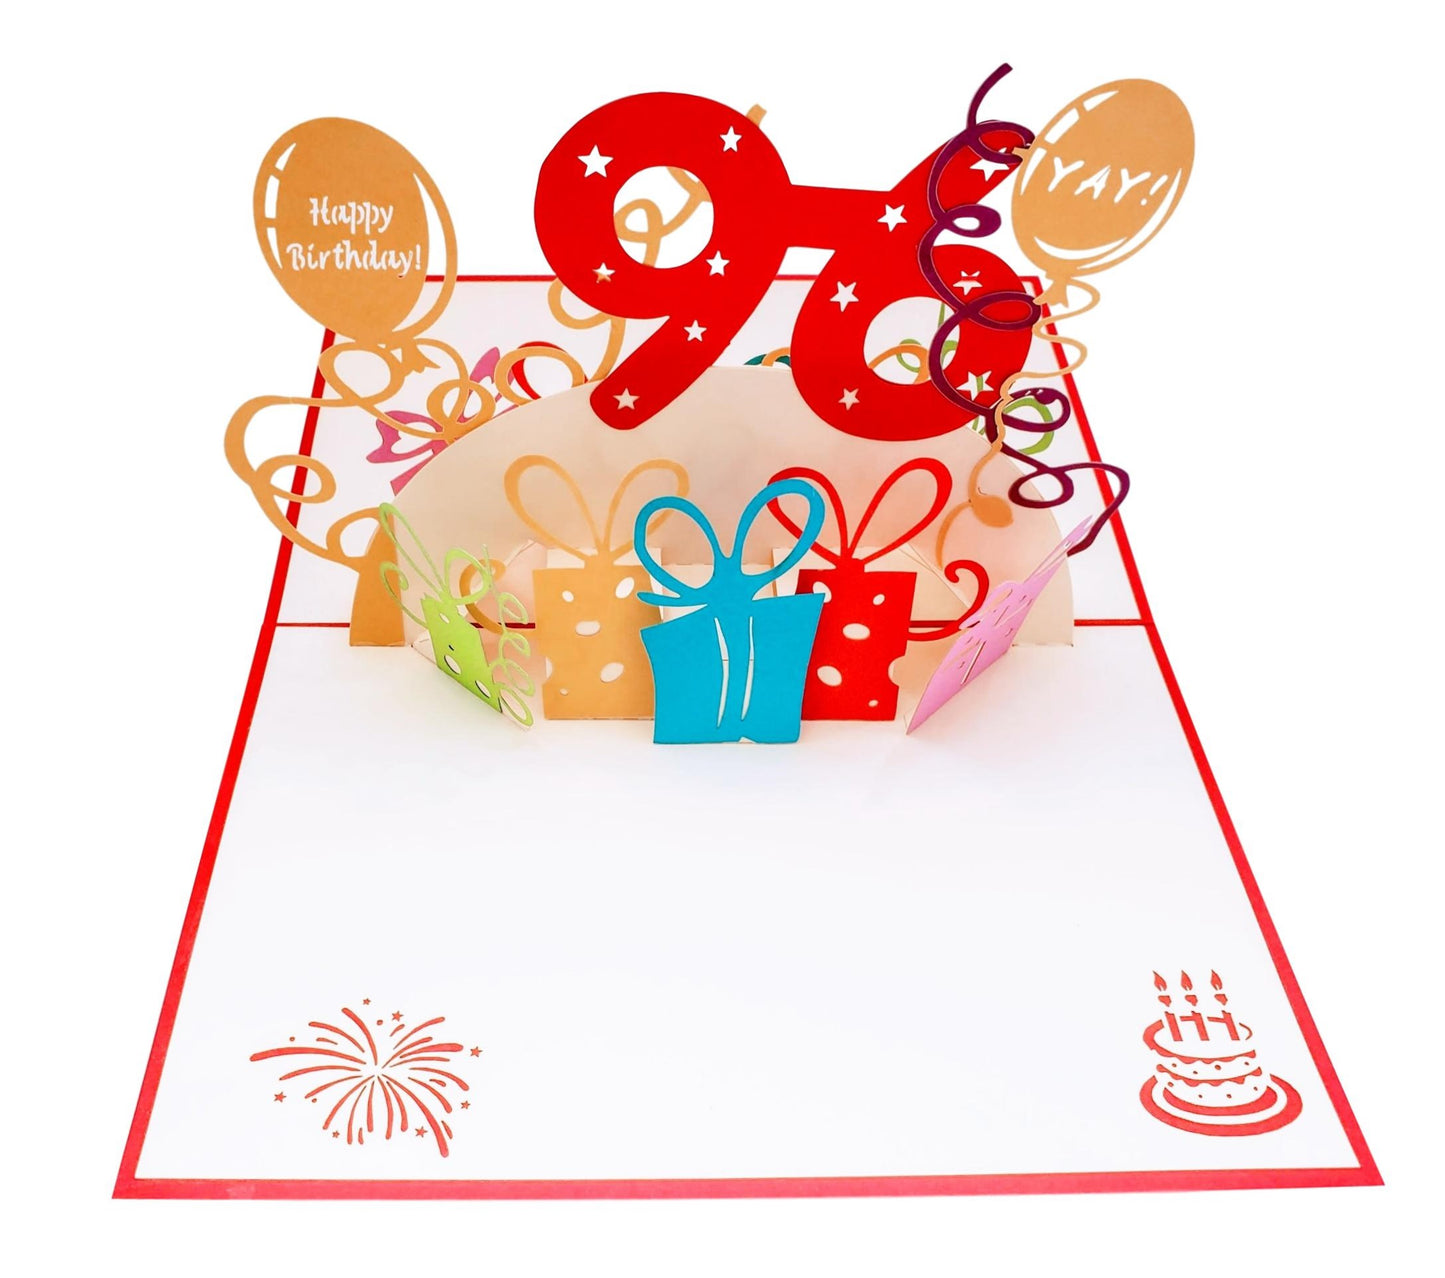 Happy 96th Birthday with Presents 3D Pop Up Greeting Card - Birthday - Compleanos - Feliz - funny bi - iGifts And Cards